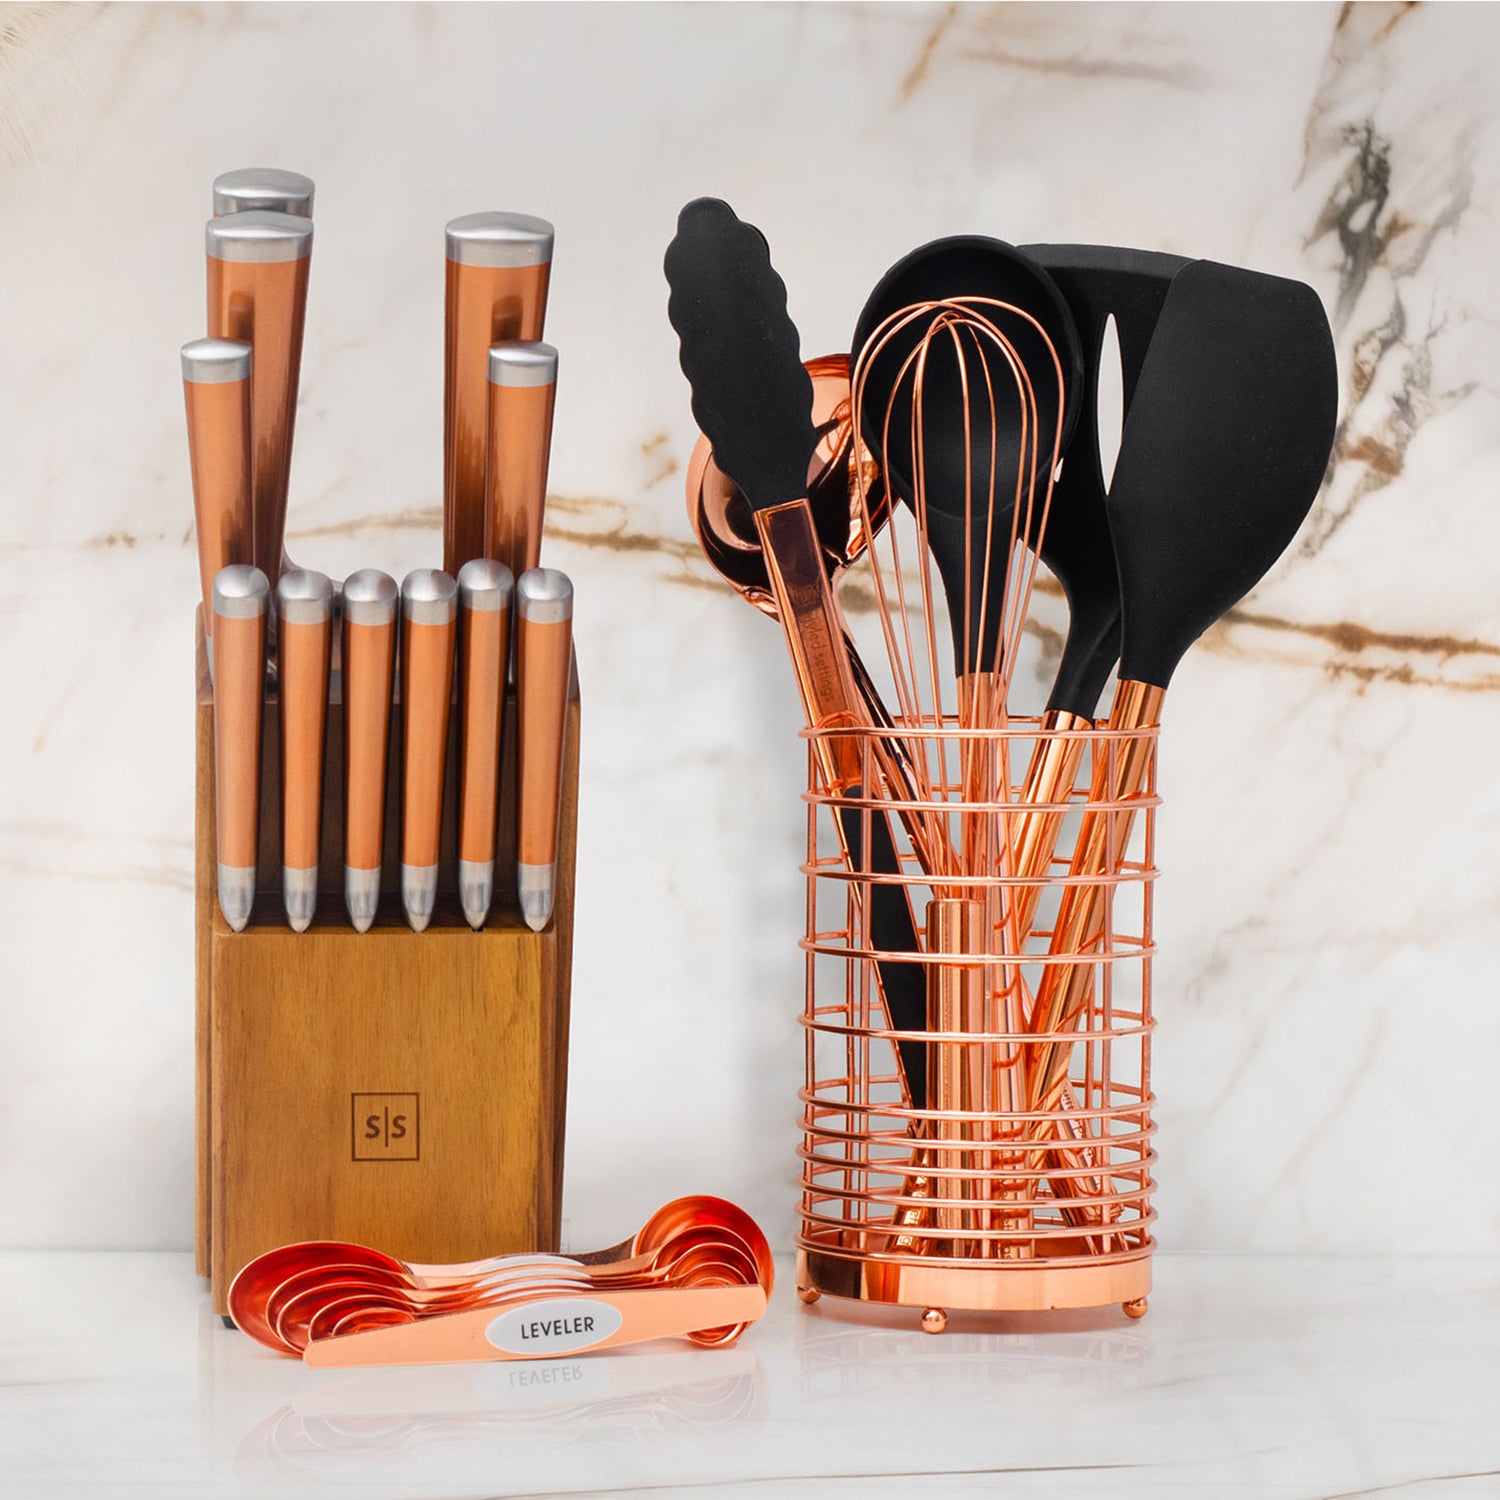 Copper and Black Kitchen Utensils Set with Holder - Styled Settings